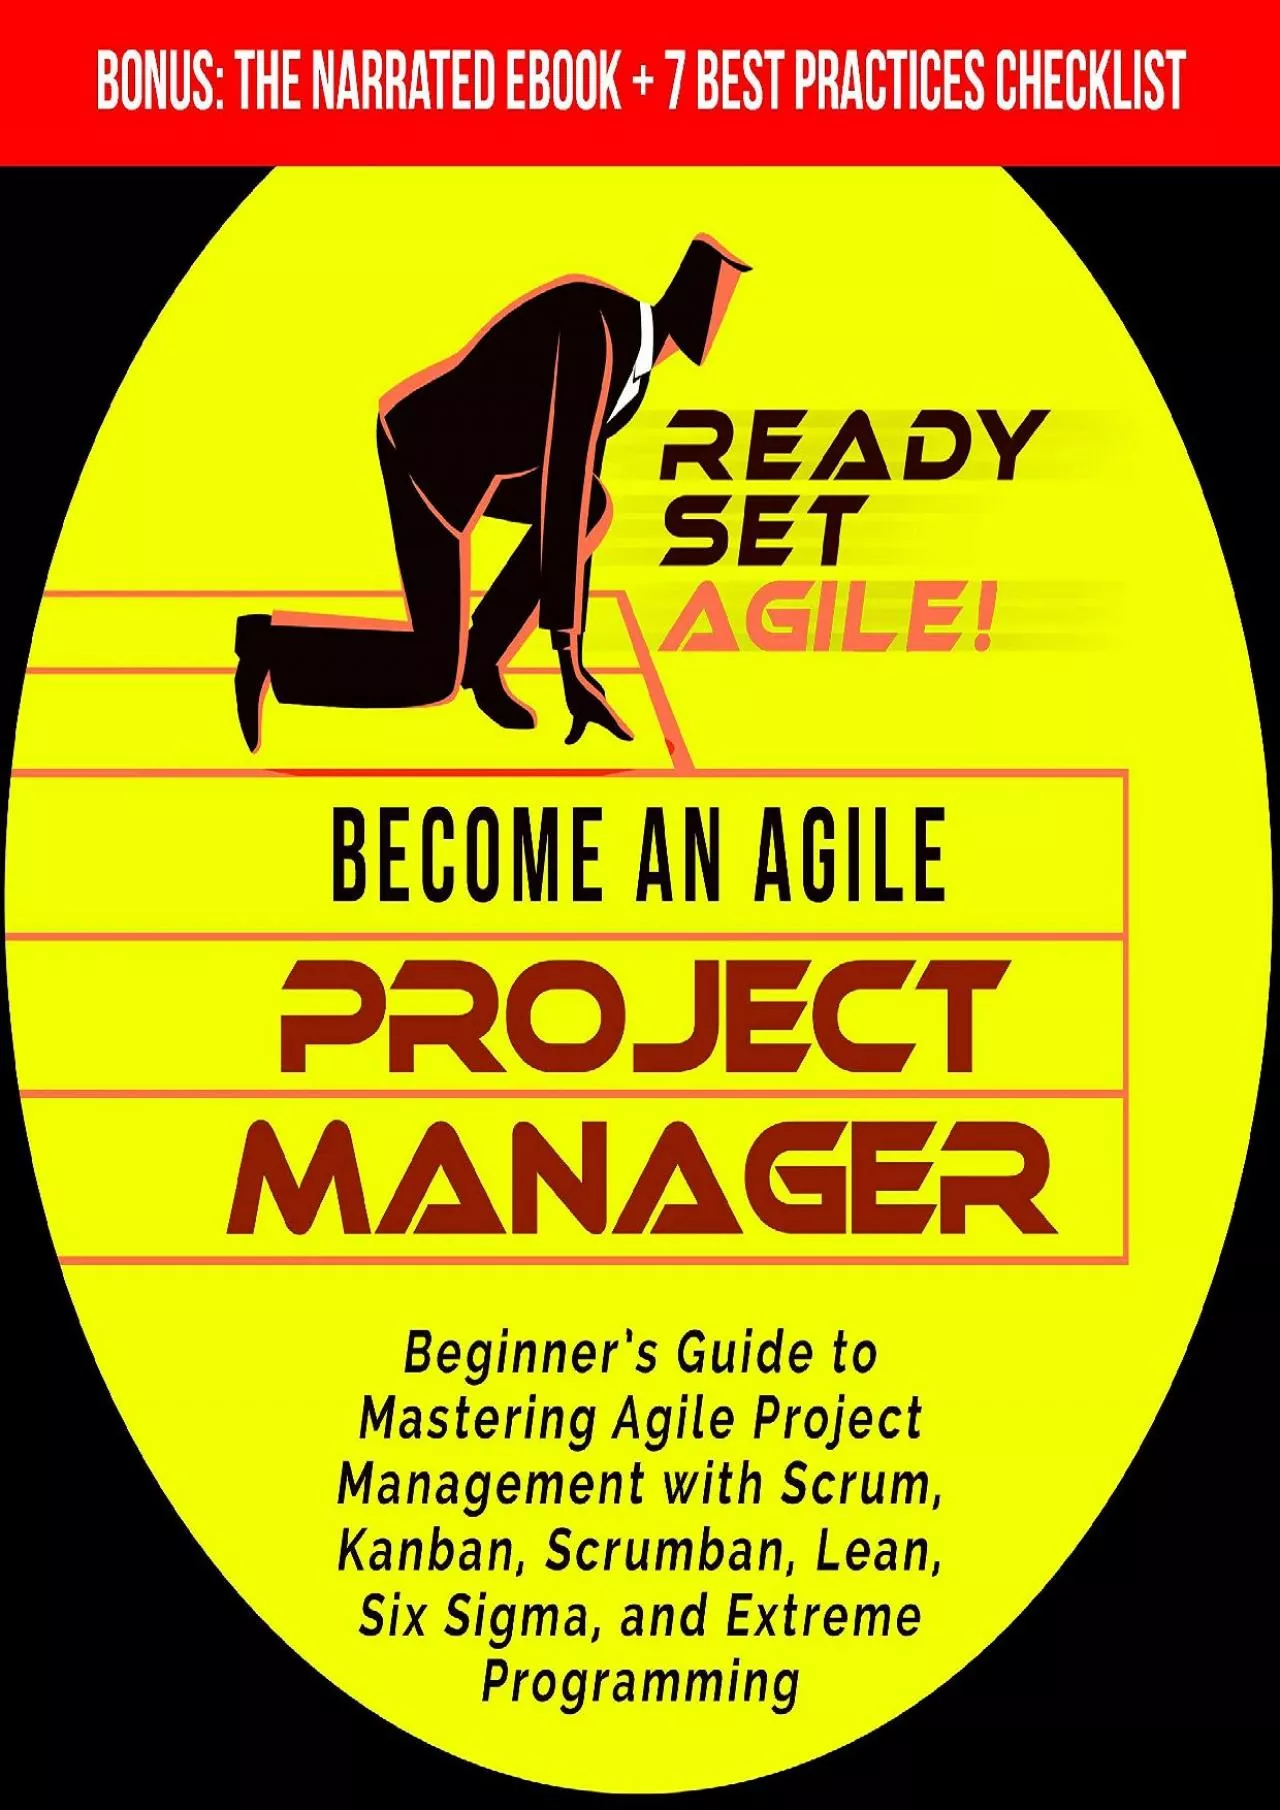 Become an Agile Project Manager: Beginner’s Guide to Mastering Agile Project Management